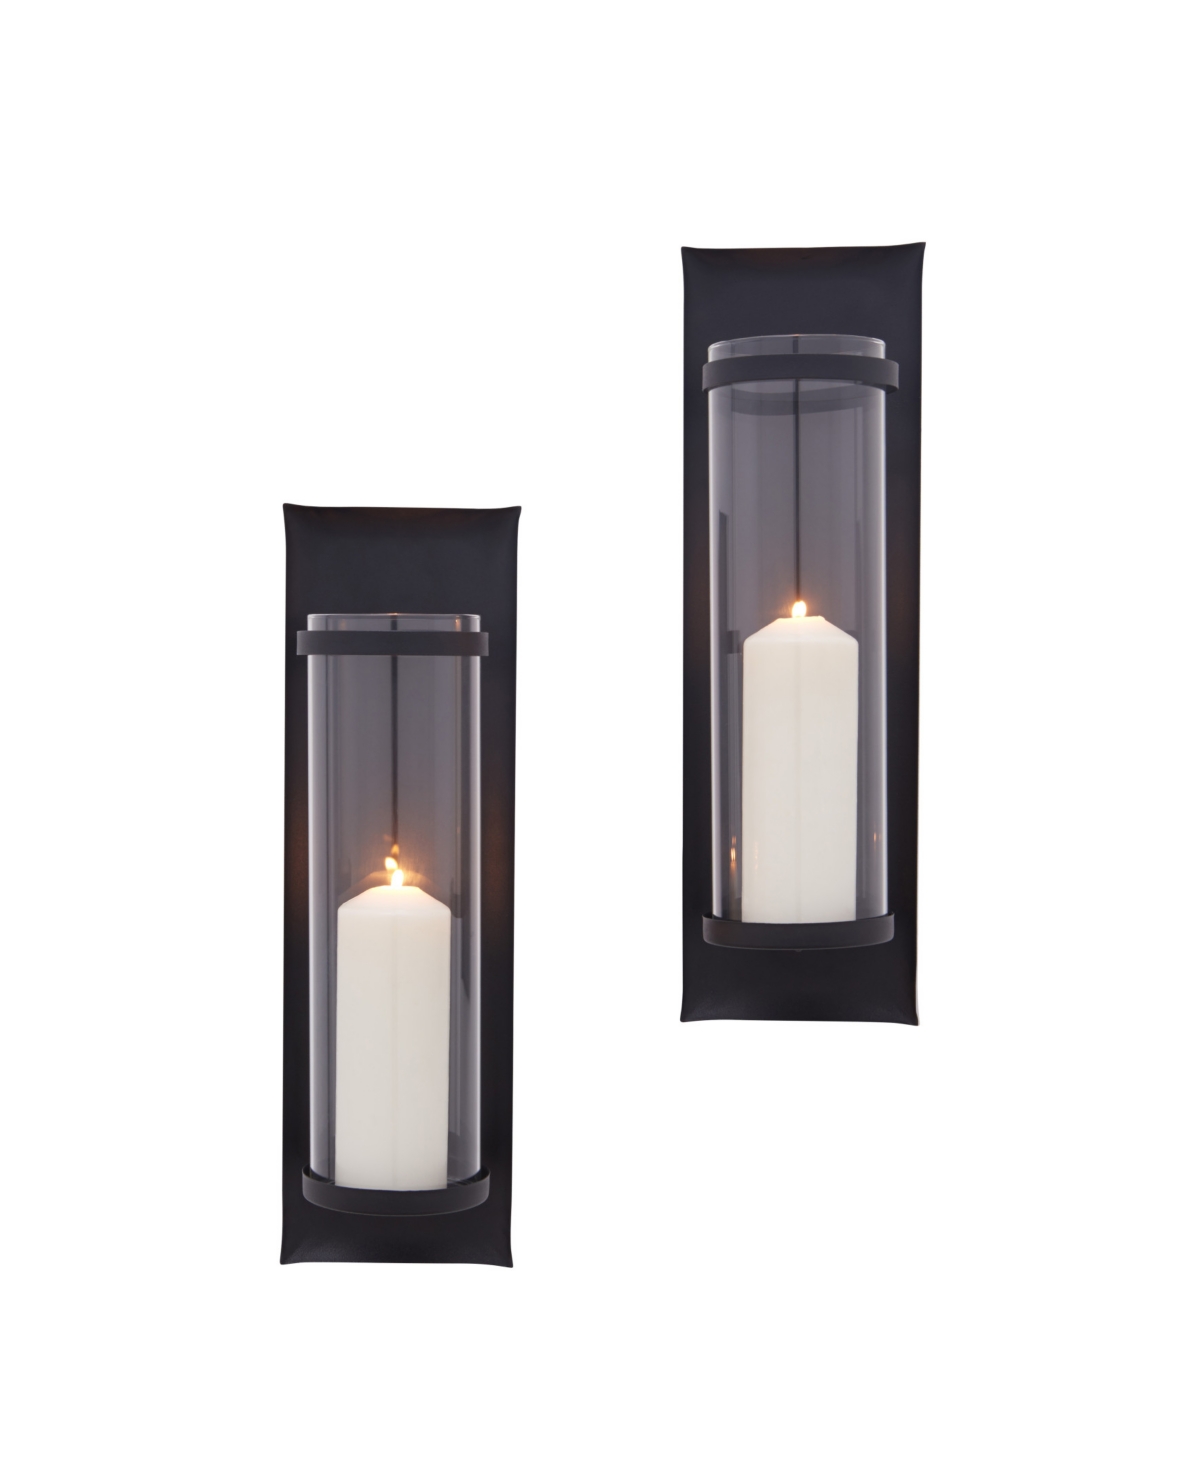 Danya B . Metal Pillar Candle Sconces With Glass Inserts - Set Of 2 In Black